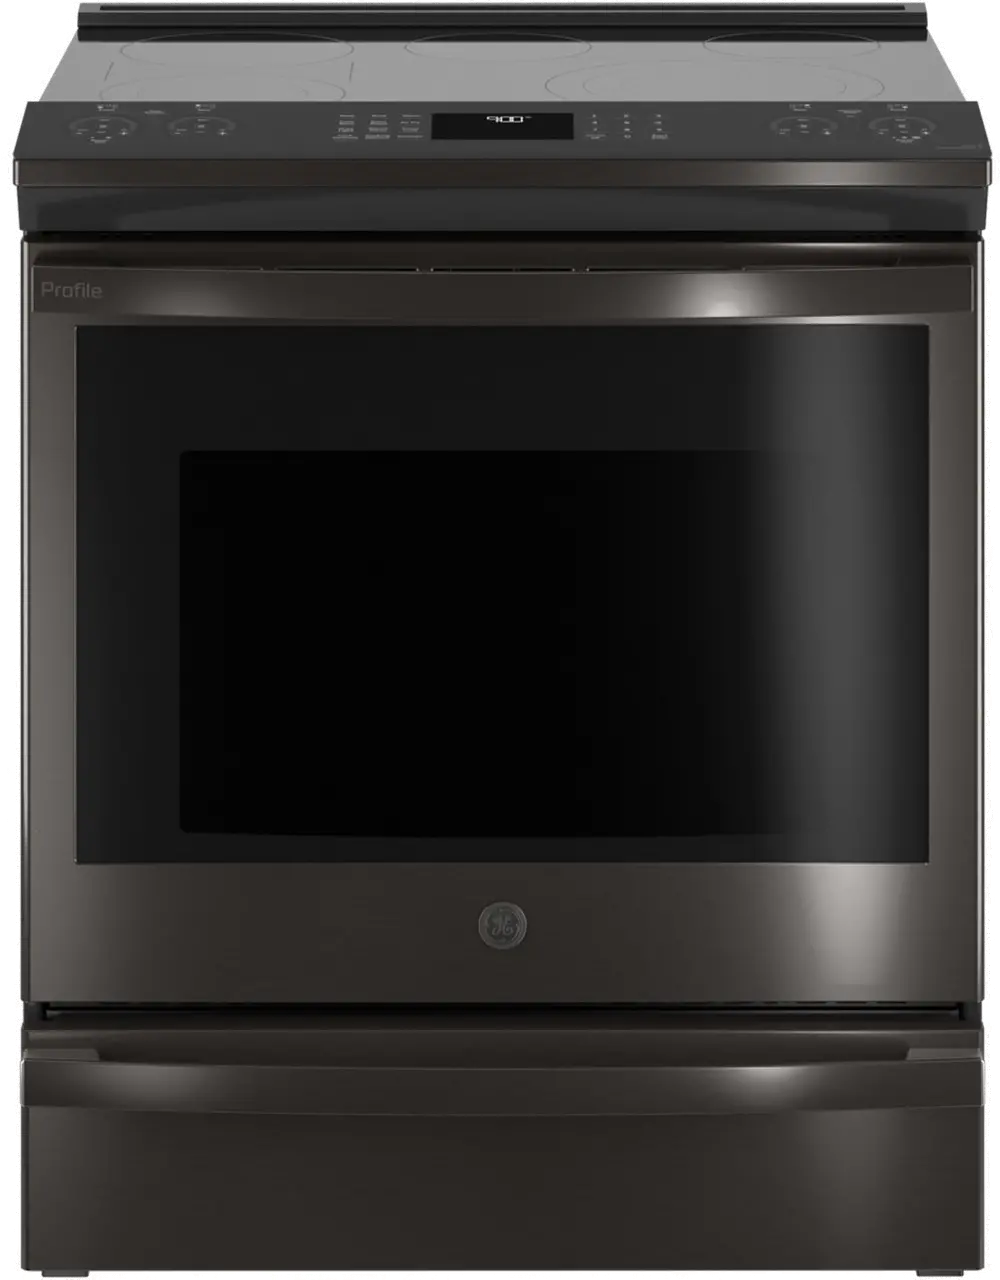 PSS93BPTS GE Profile 30 Inch Smart Convection Range - 5.3 cu. ft., Black Stainless Steel-1